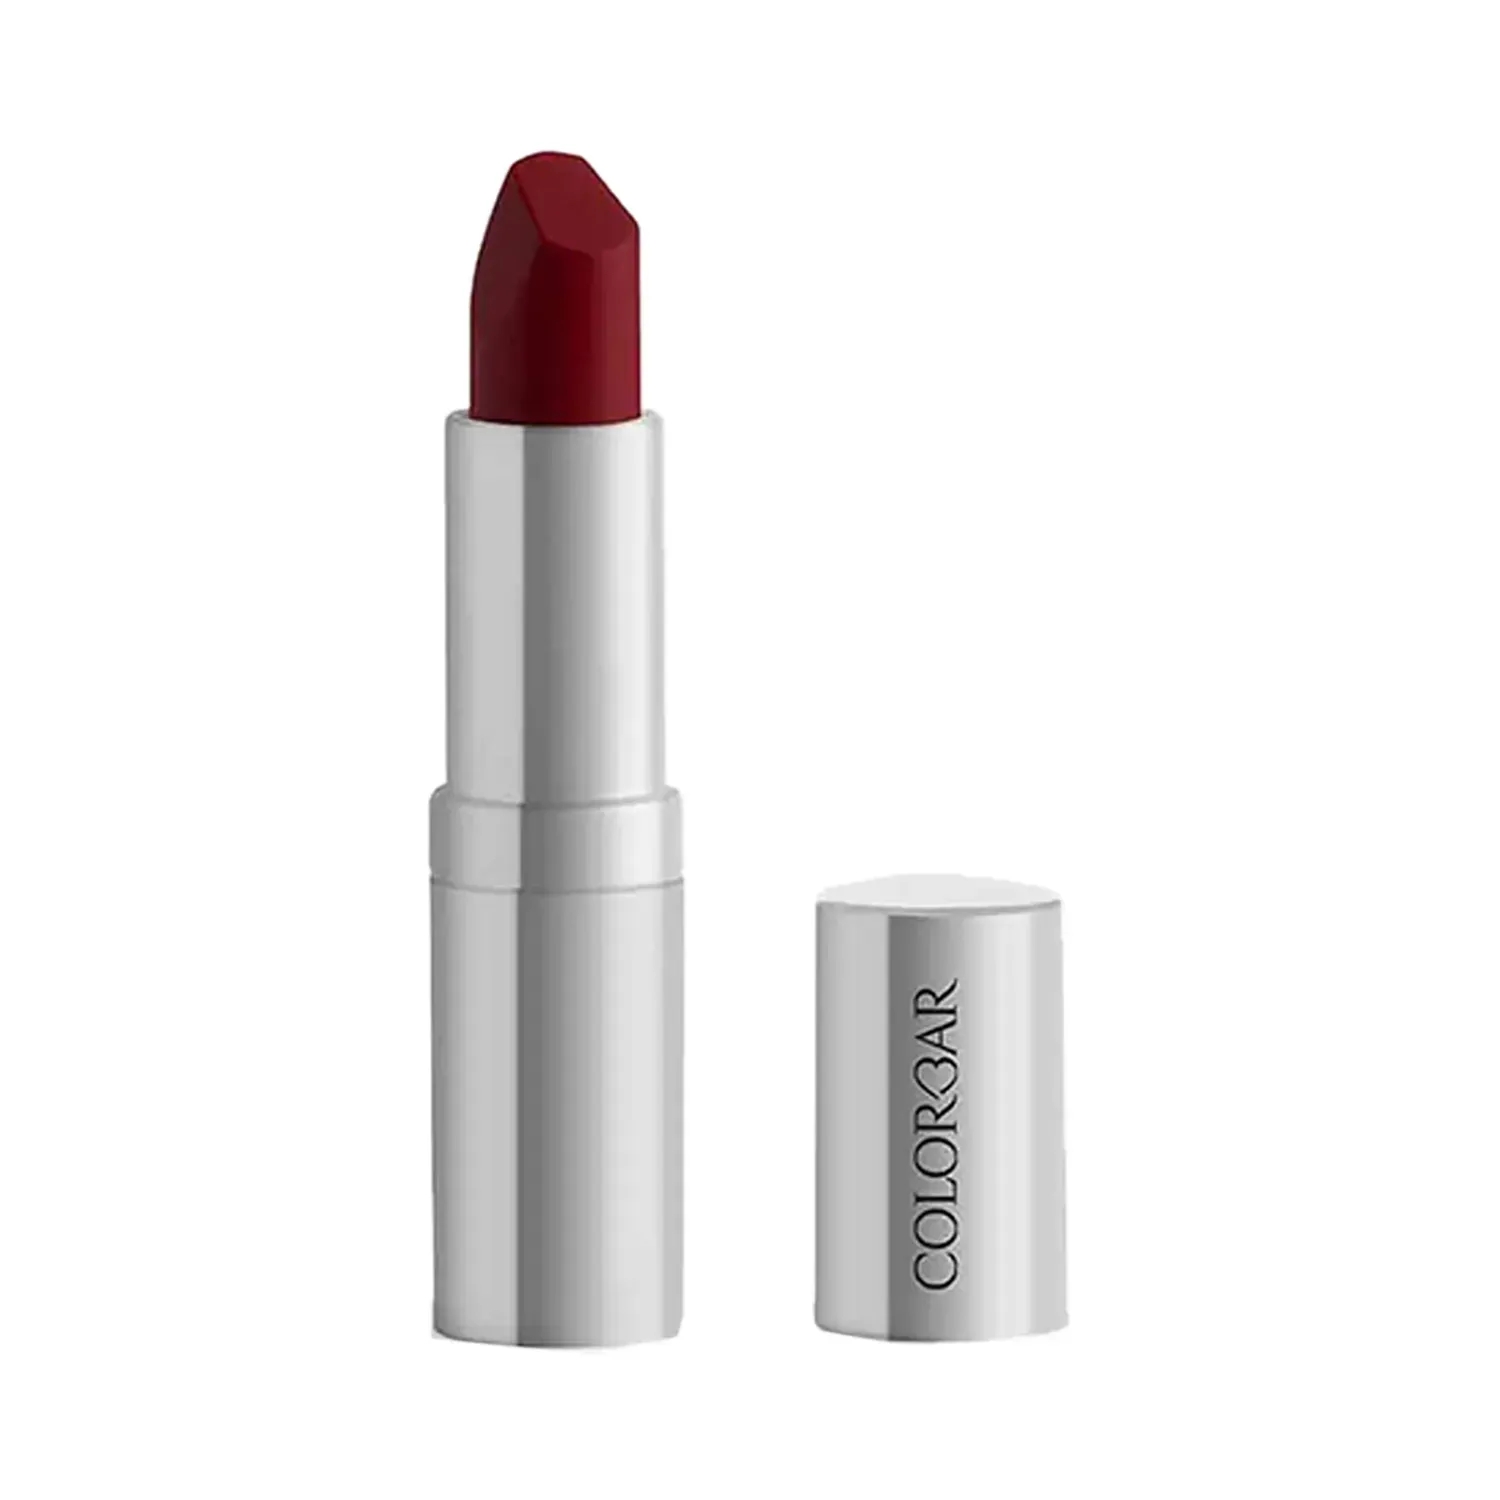 Colorbar | Colorbar Matte Touch Lipstick - 036 Electric Red (4.2g)